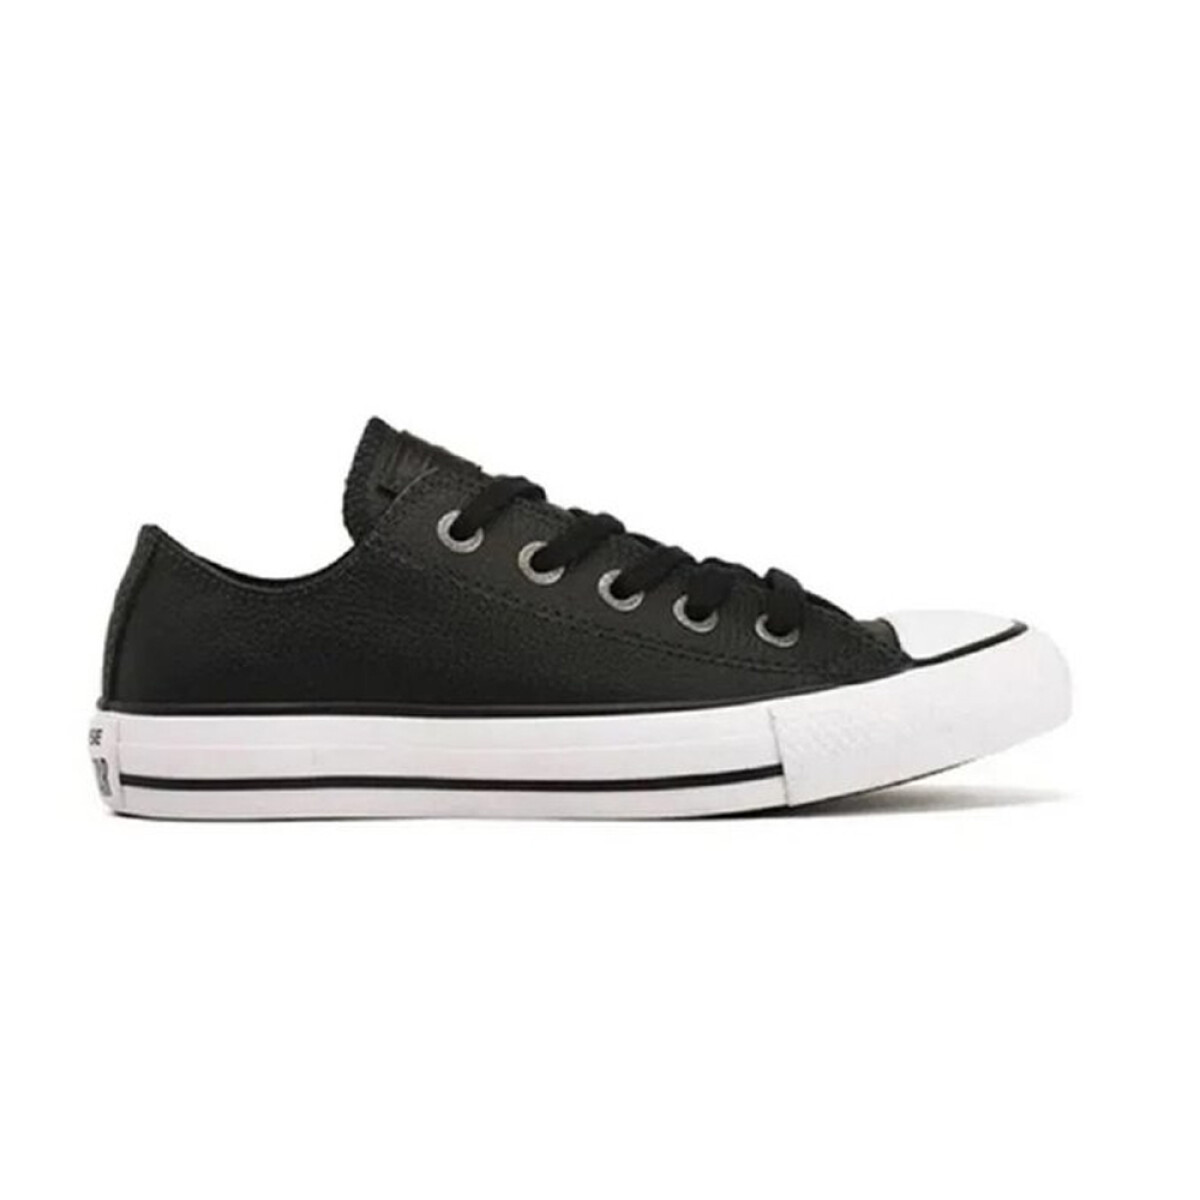 Converse Chuck Taylor AS OX Leather - Black 